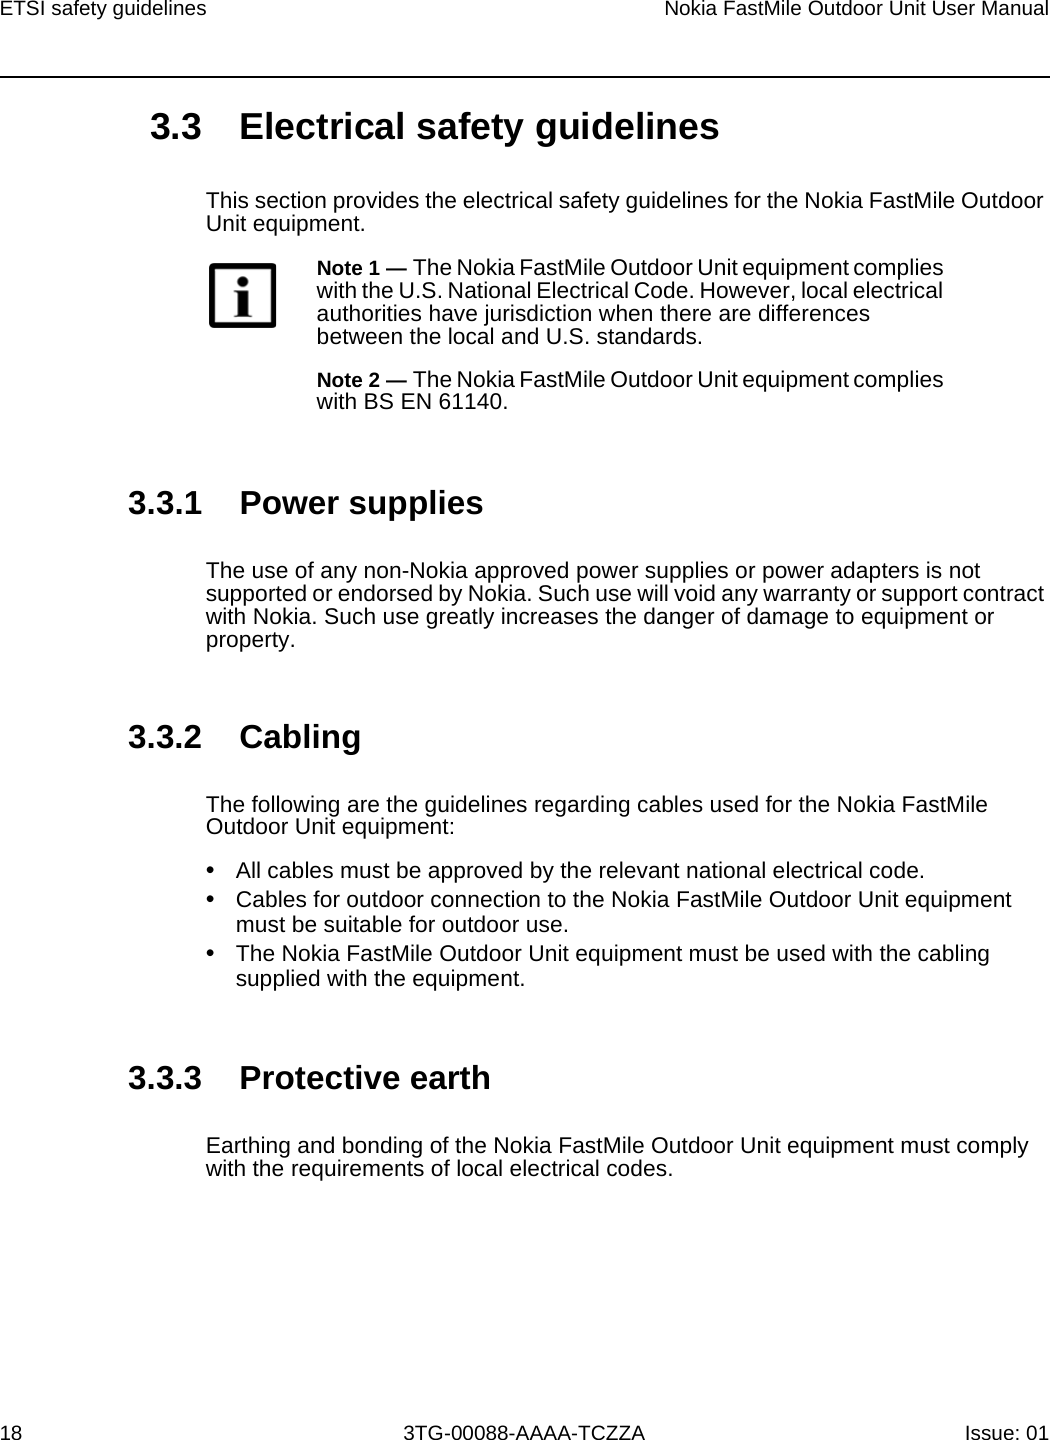 ETSI safety guidelines18Nokia FastMile Outdoor Unit User Manual3TG-00088-AAAA-TCZZA Issue: 01 3.3 Electrical safety guidelinesThis section provides the electrical safety guidelines for the Nokia FastMile Outdoor Unit equipment.3.3.1 Power suppliesThe use of any non-Nokia approved power supplies or power adapters is not supported or endorsed by Nokia. Such use will void any warranty or support contract with Nokia. Such use greatly increases the danger of damage to equipment or property.3.3.2 CablingThe following are the guidelines regarding cables used for the Nokia FastMile Outdoor Unit equipment:•All cables must be approved by the relevant national electrical code.•Cables for outdoor connection to the Nokia FastMile Outdoor Unit equipment must be suitable for outdoor use.•The Nokia FastMile Outdoor Unit equipment must be used with the cabling supplied with the equipment. 3.3.3 Protective earthEarthing and bonding of the Nokia FastMile Outdoor Unit equipment must comply with the requirements of local electrical codes.Note 1 — The Nokia FastMile Outdoor Unit equipment complies with the U.S. National Electrical Code. However, local electrical authorities have jurisdiction when there are differences between the local and U.S. standards.Note 2 — The Nokia FastMile Outdoor Unit equipment complies with BS EN 61140.